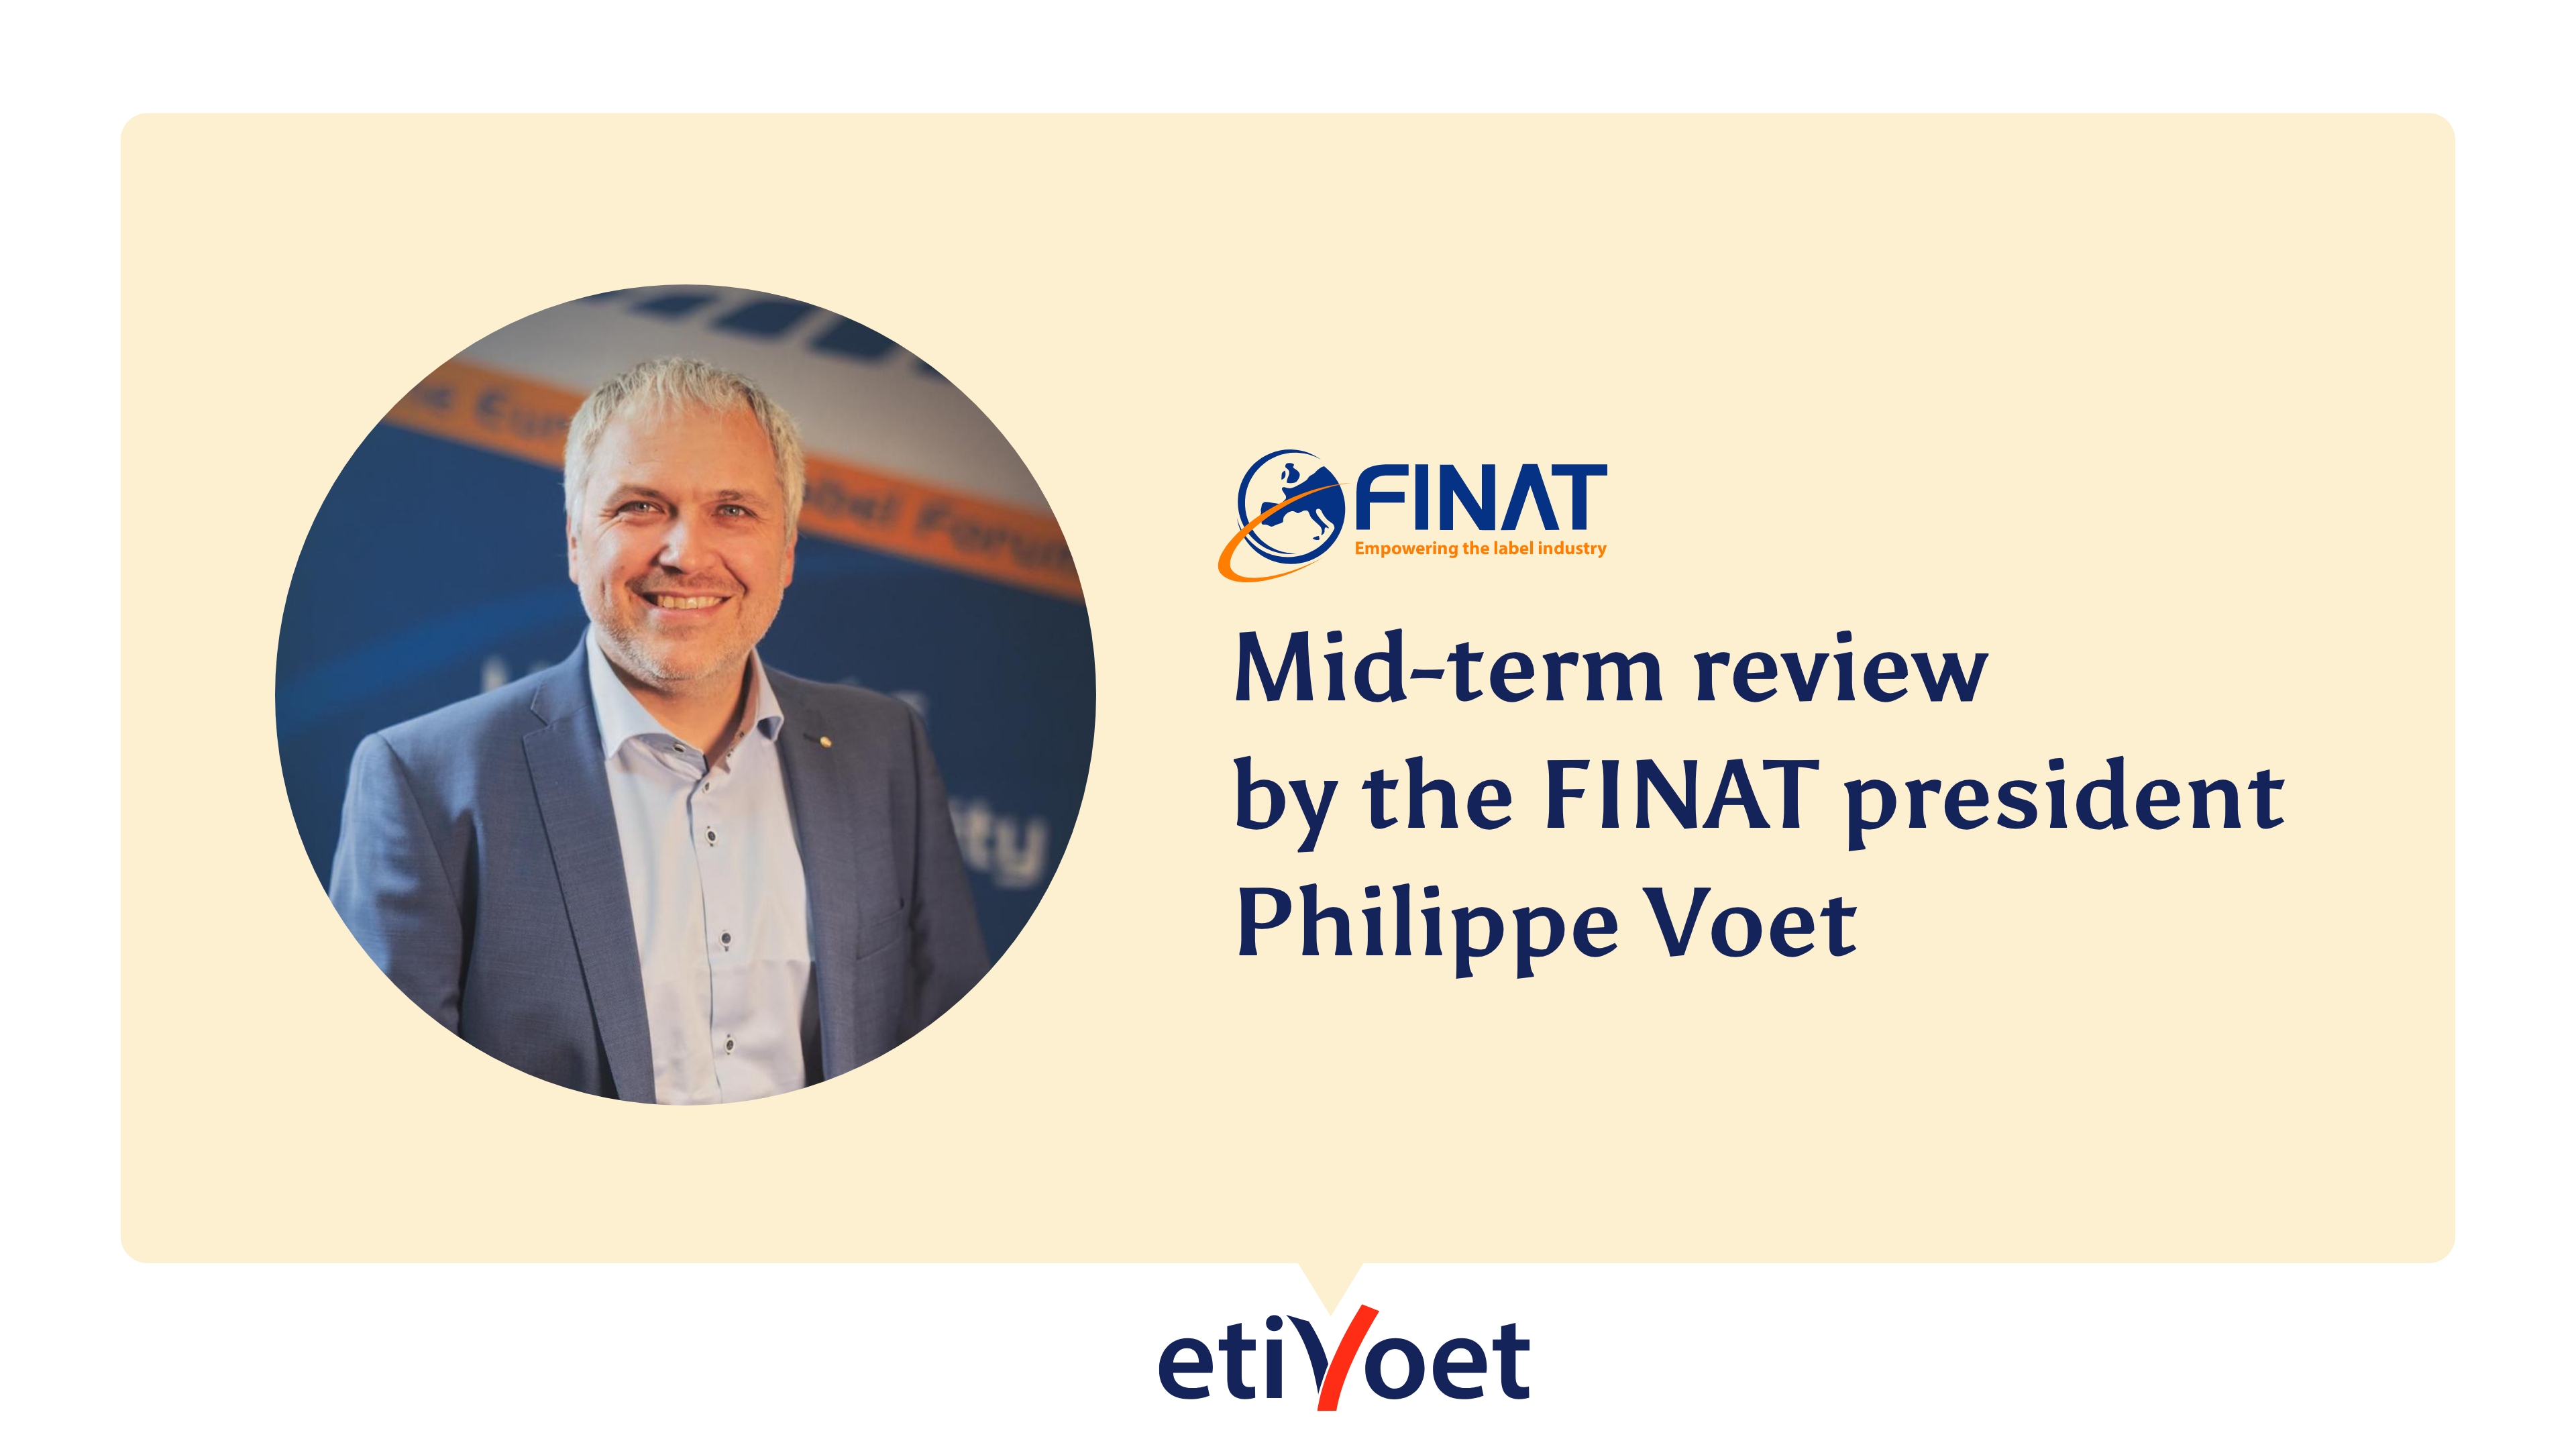 mid-term review by FINAT president